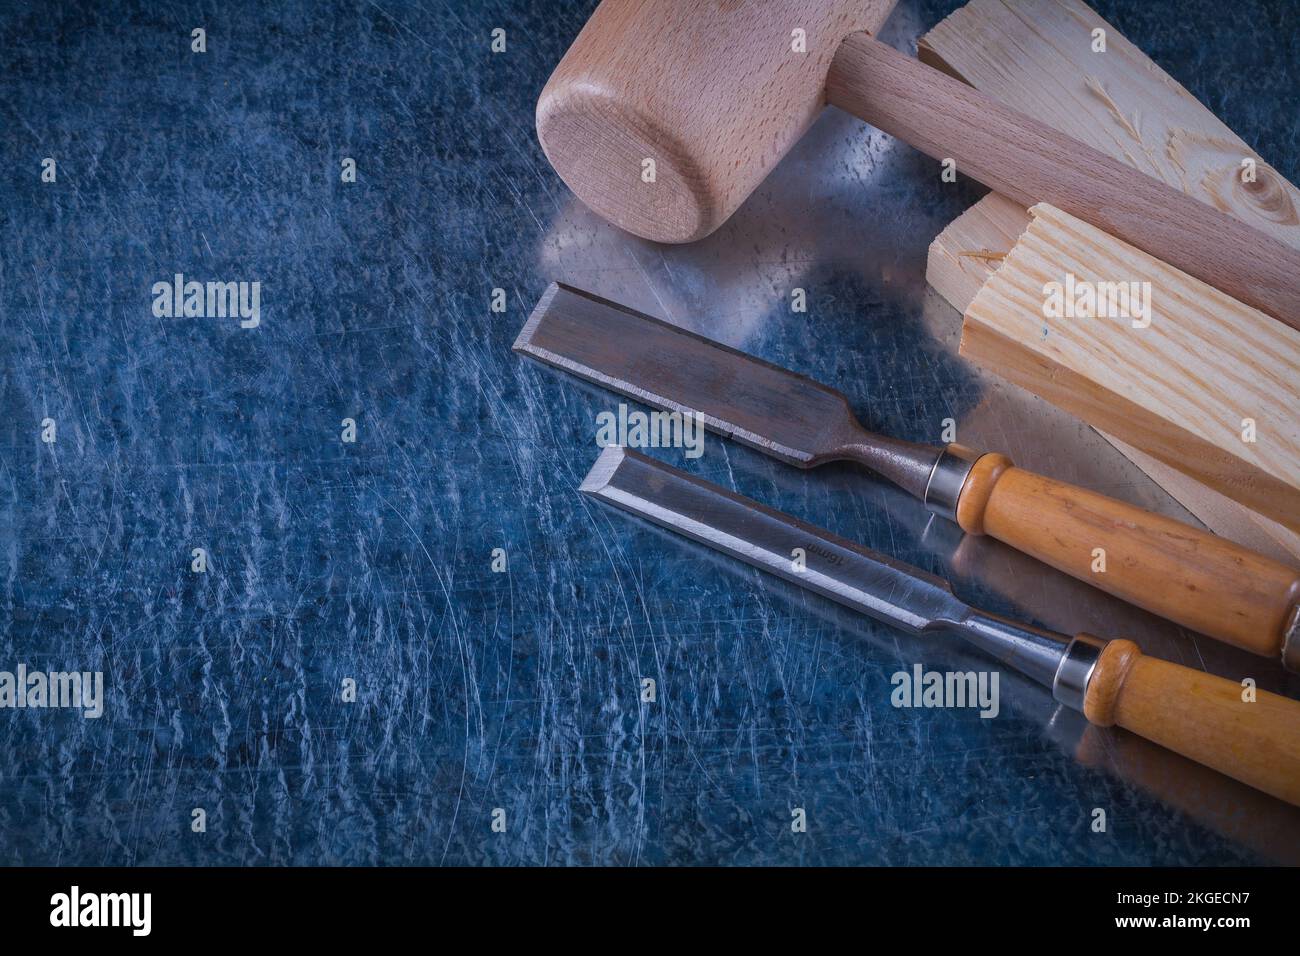 Lump hammer wooden studs and flat chisels on scratched metallic background construction concept. Stock Photo